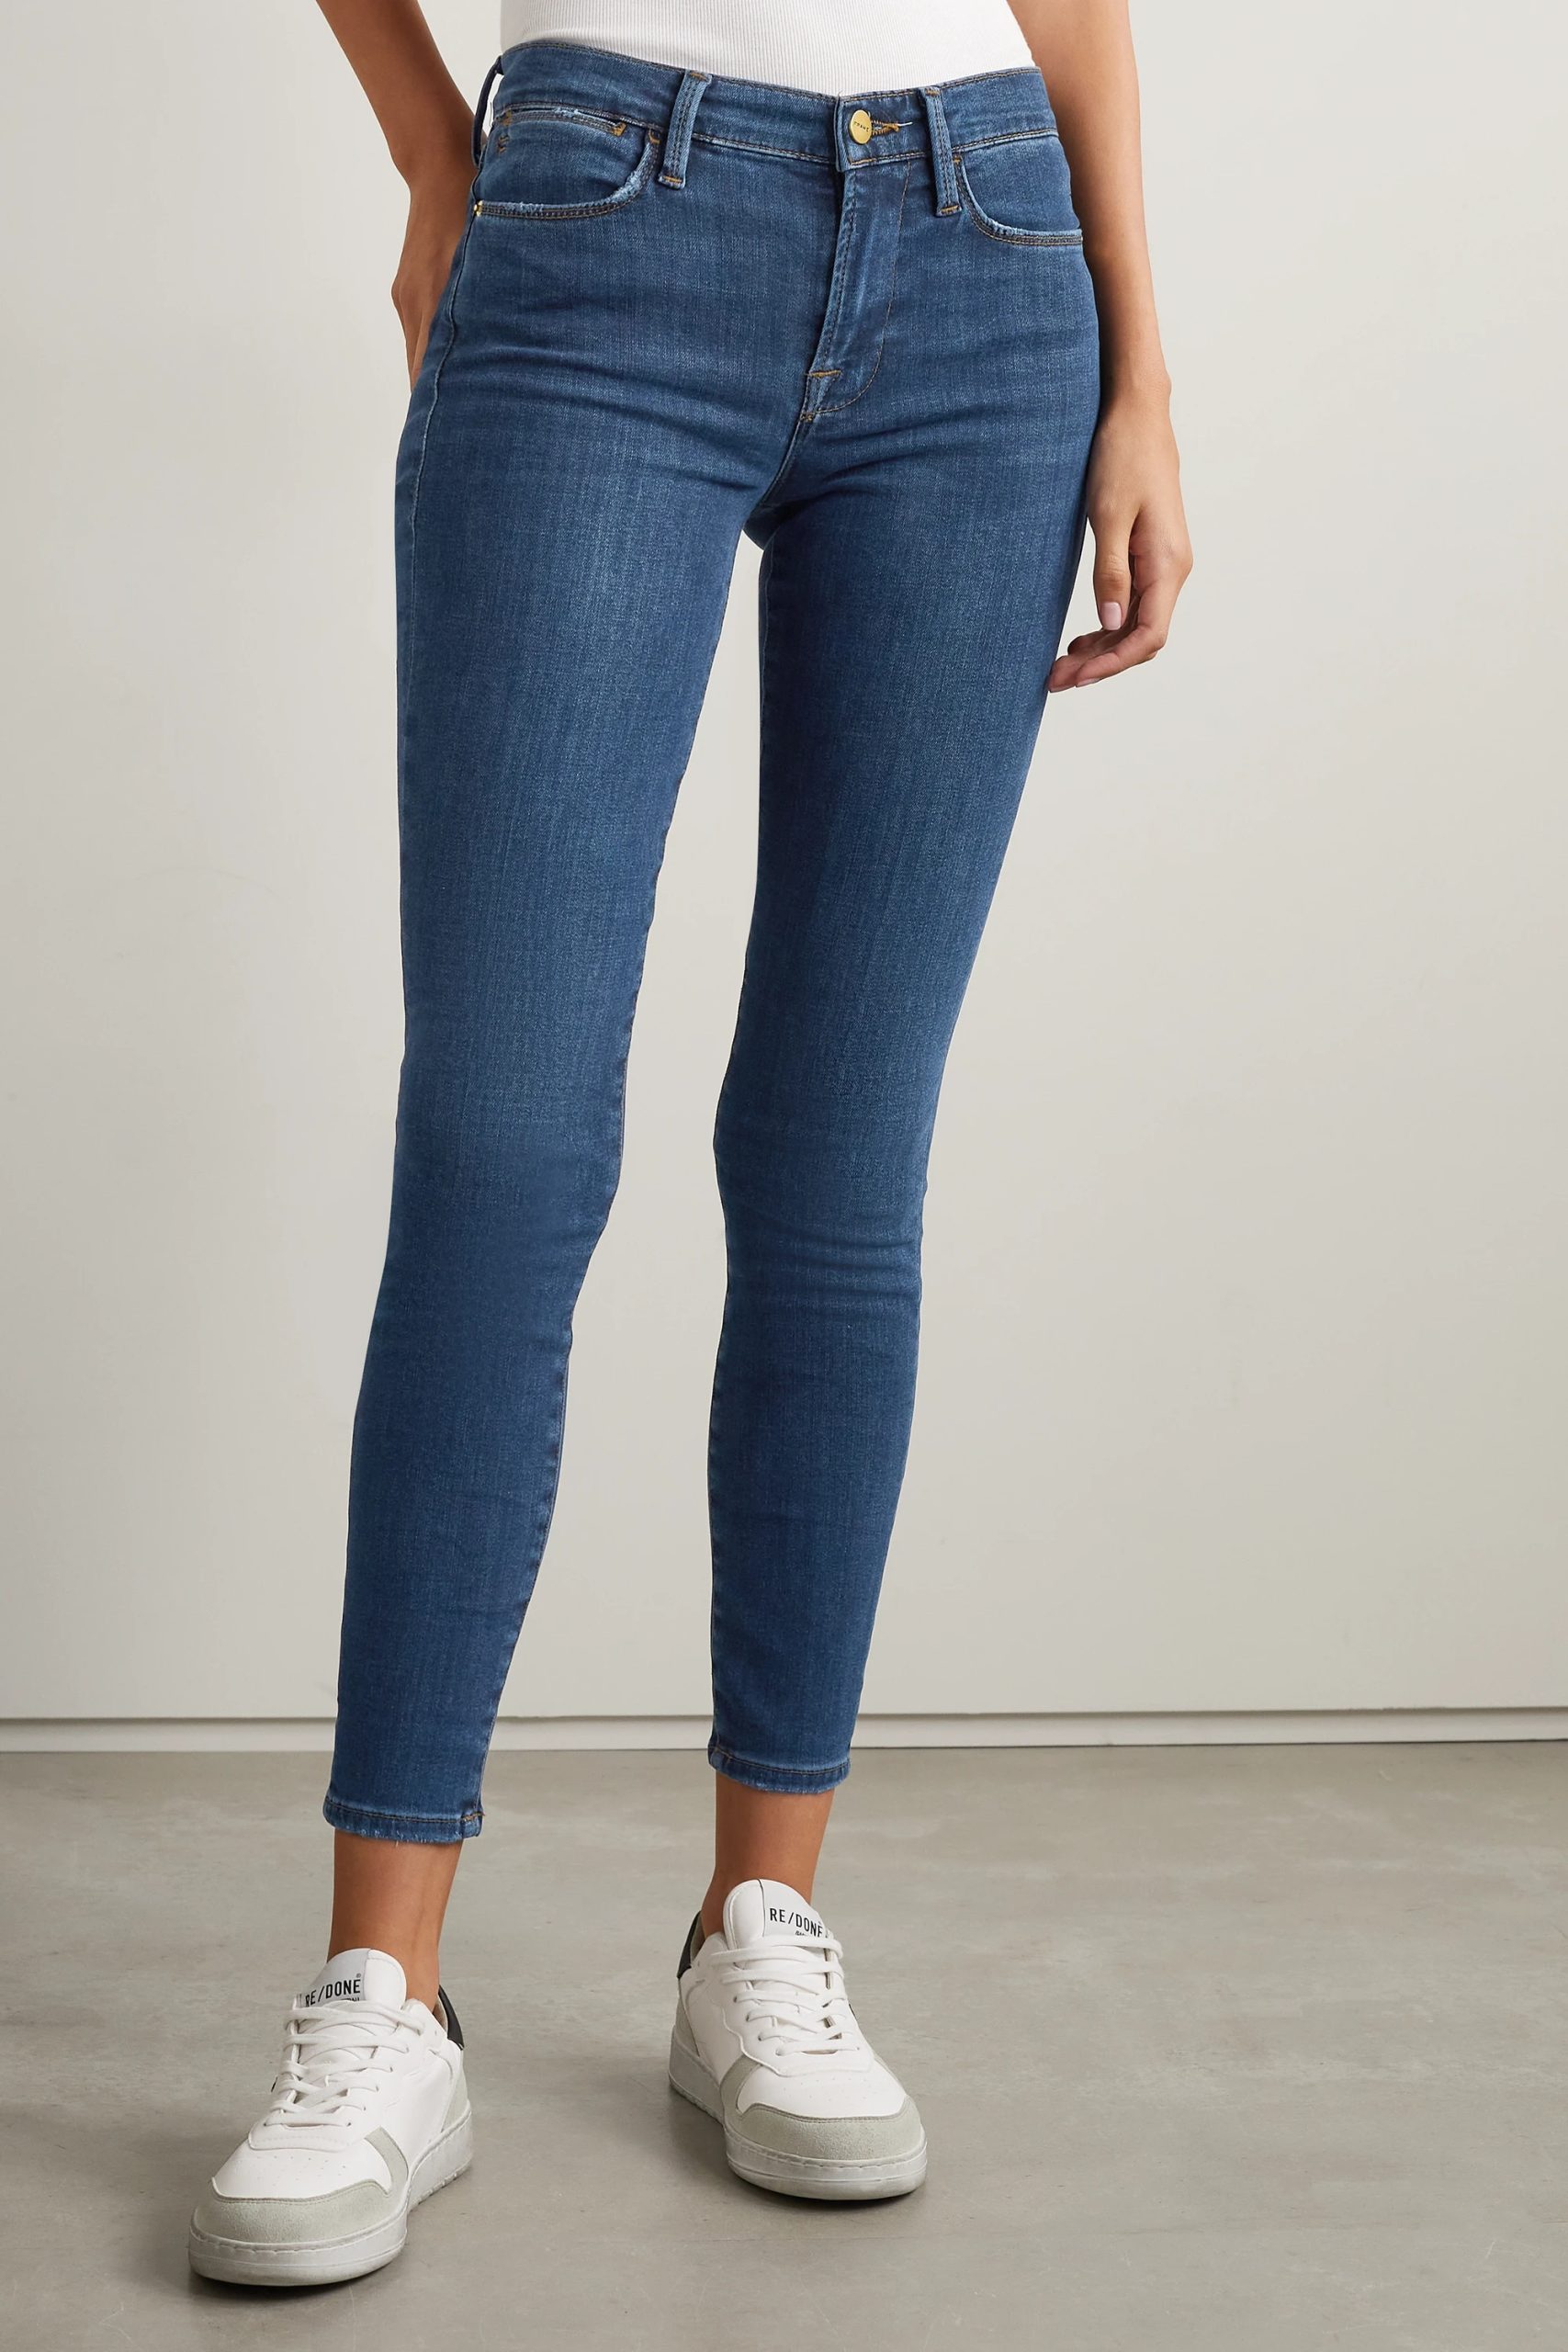 Best jeans for tall women, finding jeans that offer the right fit can be a challenge. The right pair of jeans can accentuate long legs and create a balanced silhouette.